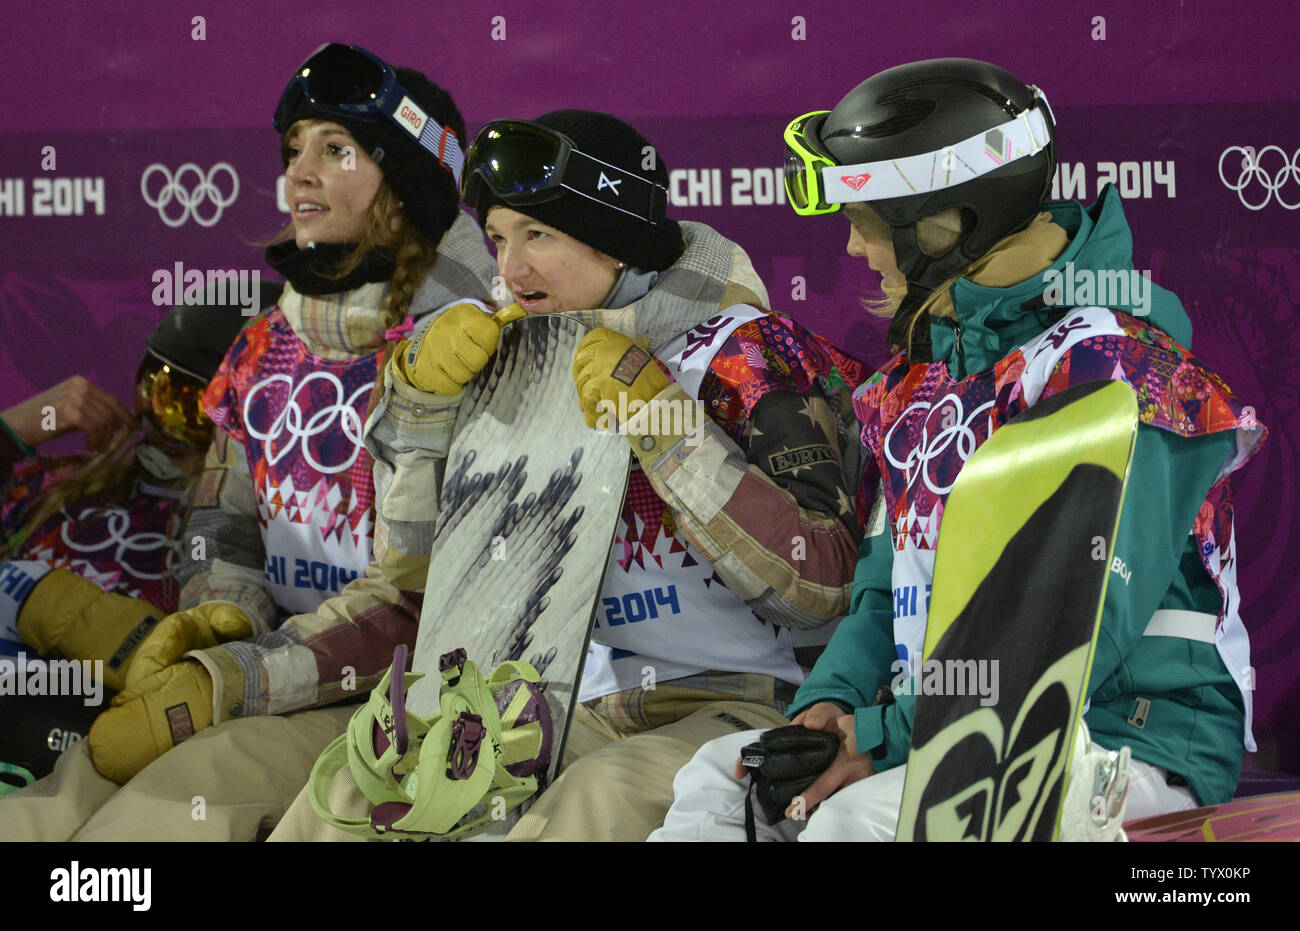 United States' Kelly Clark (C) awaits her score as she sits with teammate Kaitlyn Farrington (L) and Australia's Torah Bright during the ladies' snowboard halfpipe final at the Sochi 2014 Winter Olympics on February 12, 2014 in Krasnaya Polyana, Russia. Clark won a bronze medal while Farrington took gold and Bright silver.      UPI/Brian Kersey Stock Photo